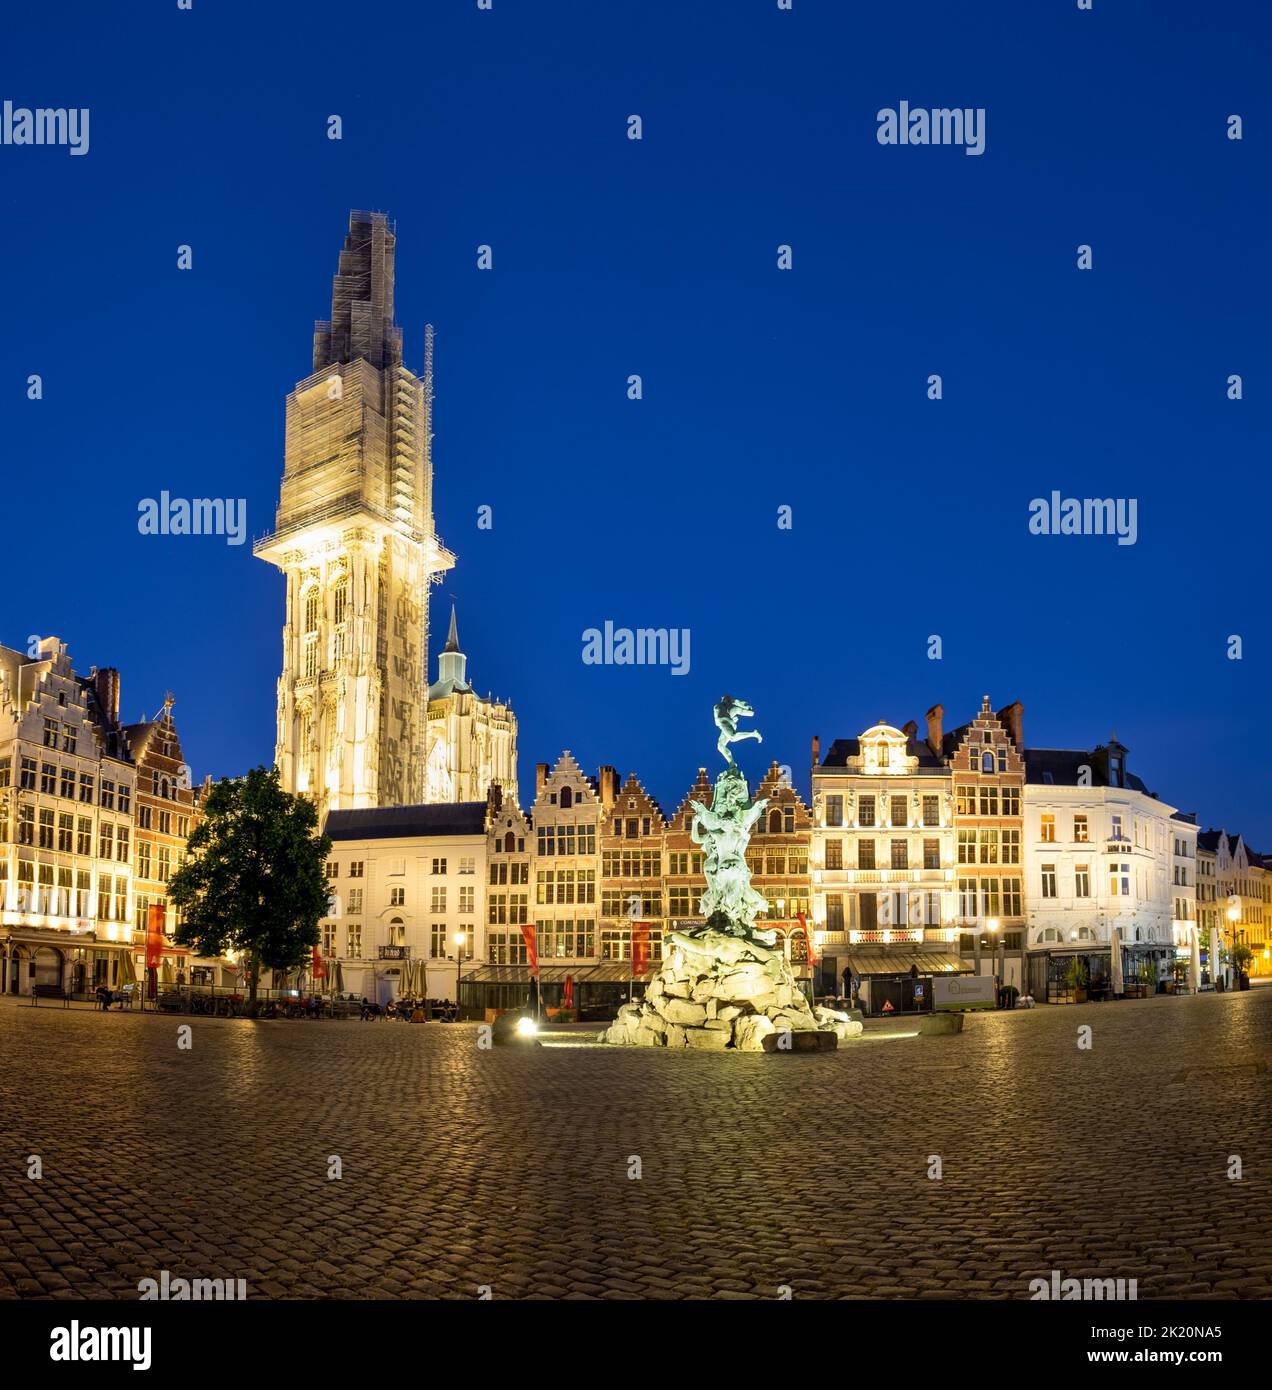 Antwerp, Belgium – 25 May 2020: Grote Markt square and cathedral in Antwerp after sunset. Stock Photo